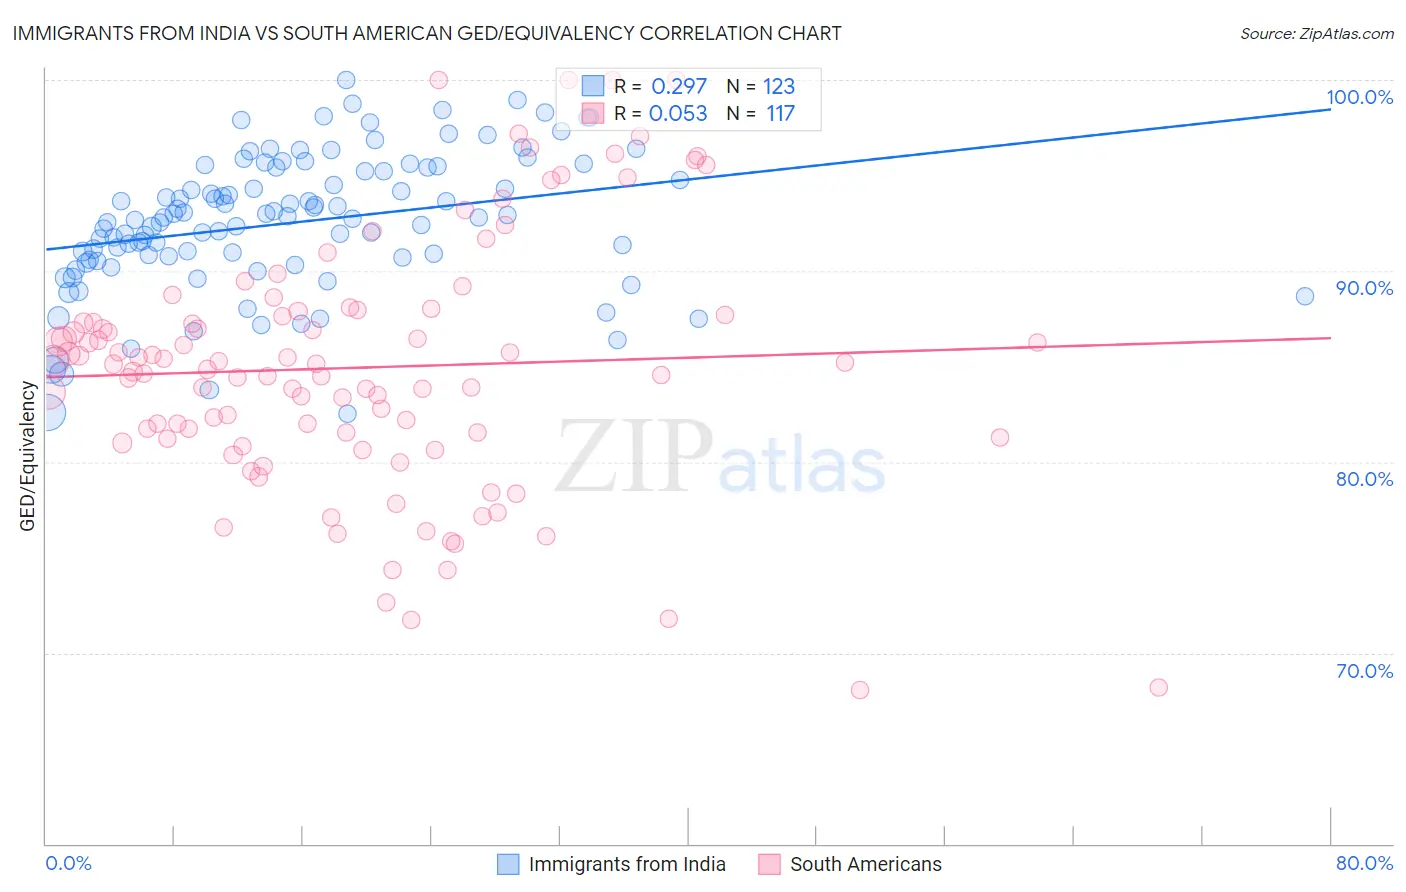 Immigrants from India vs South American GED/Equivalency